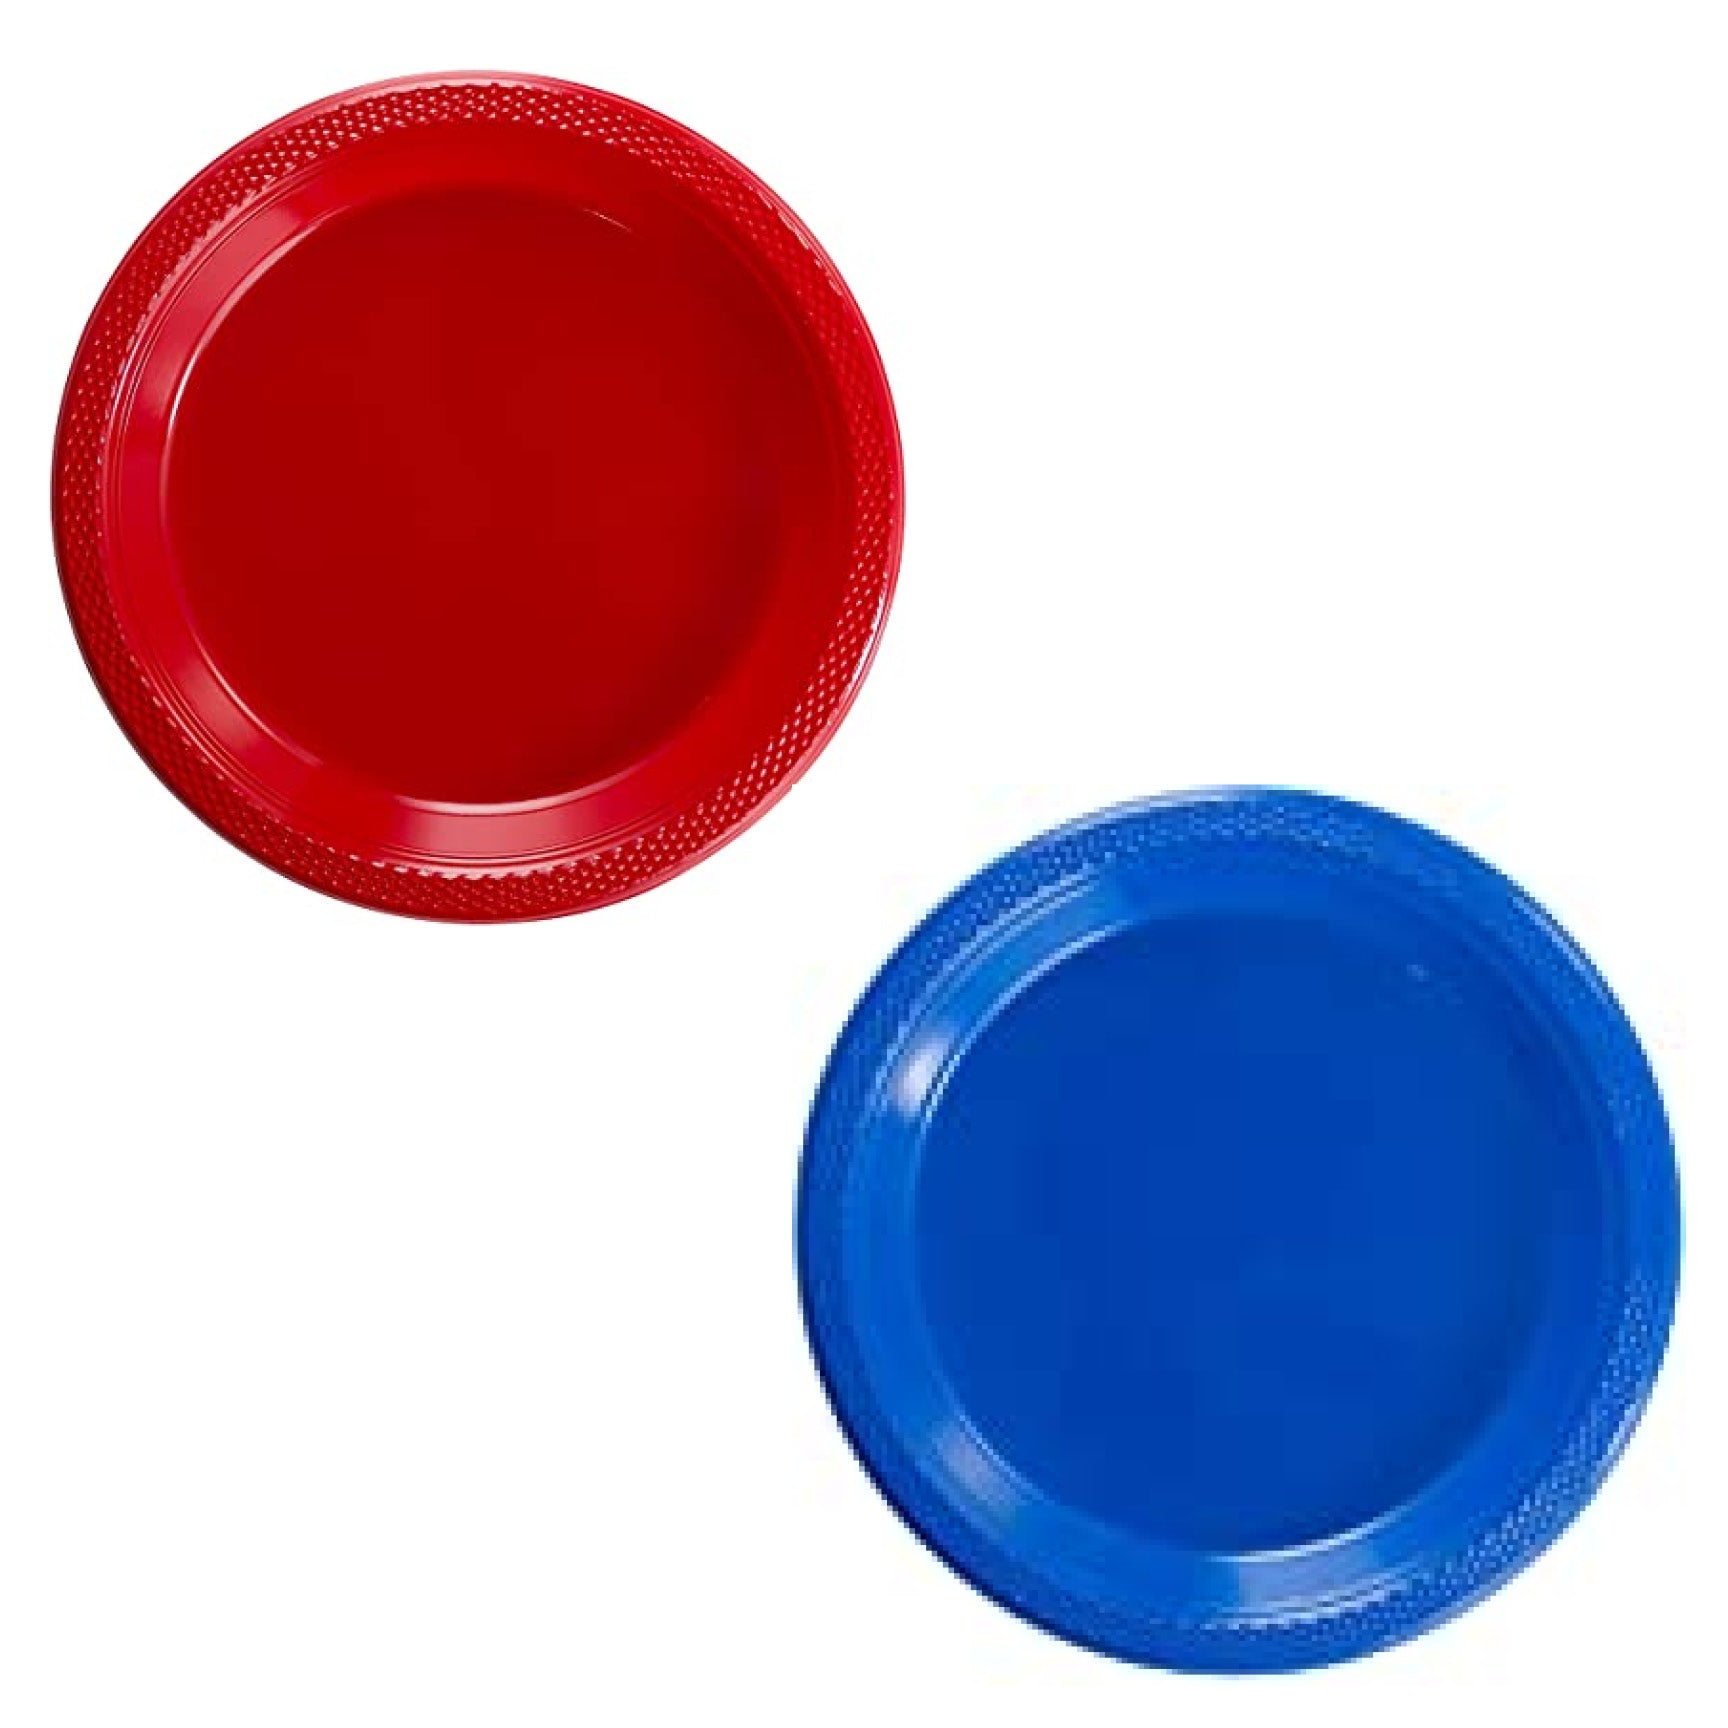 Solo Plastic Plates, Red or Blue, 9", 20/pk